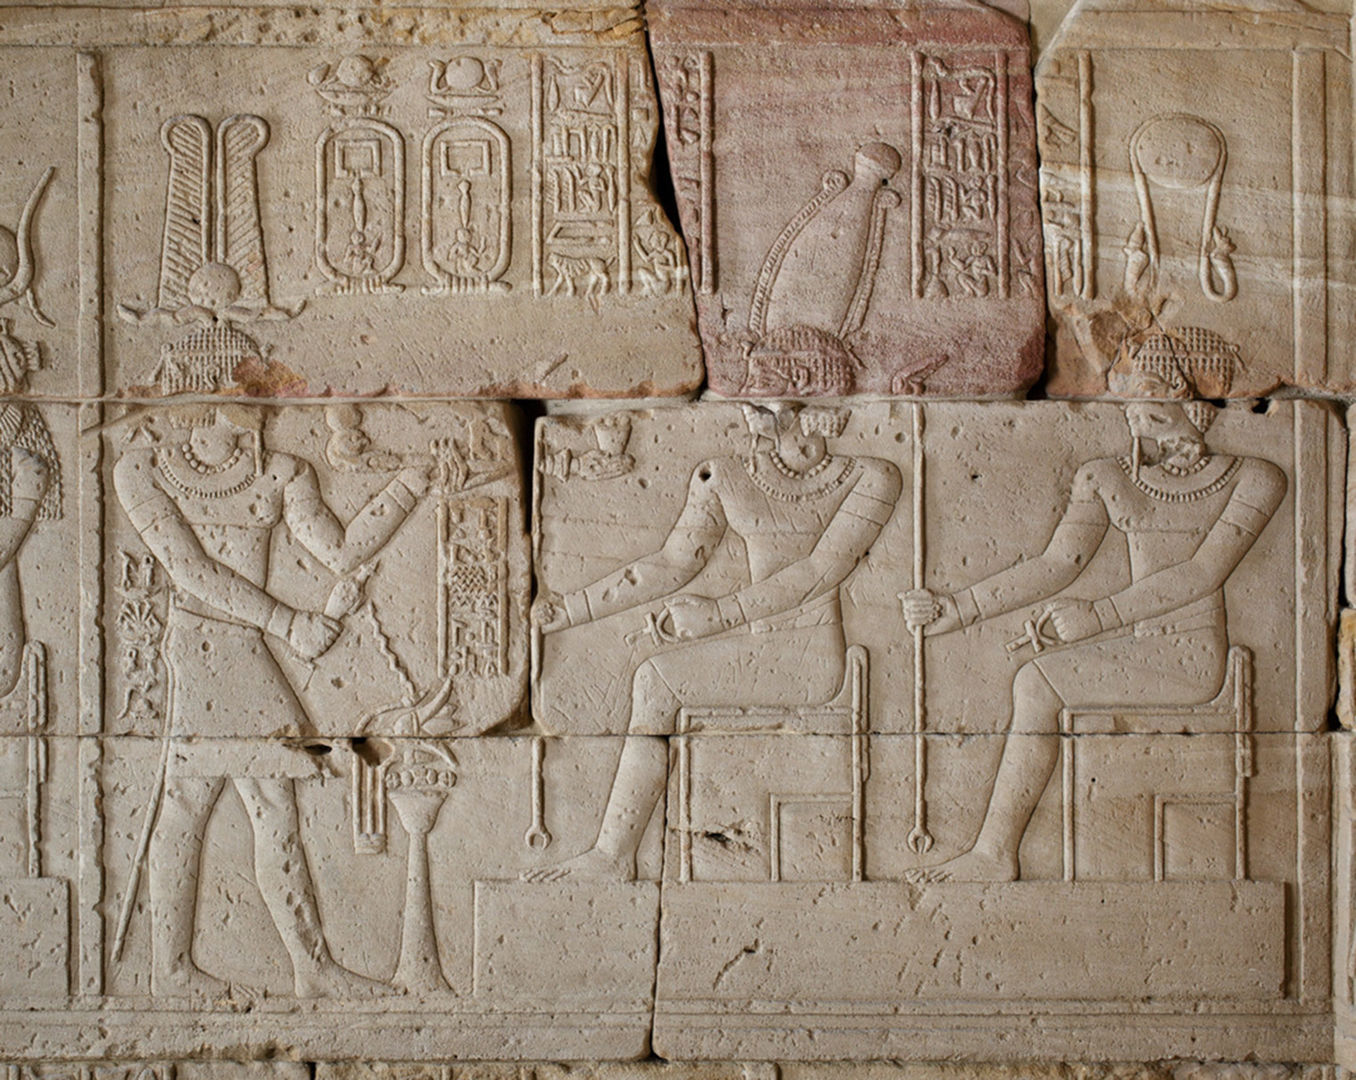 Detail depicting Augustus (left) burning incense and making a libation (a liquid offering) to the deified brothers Pedesi and Pihor (center and right)